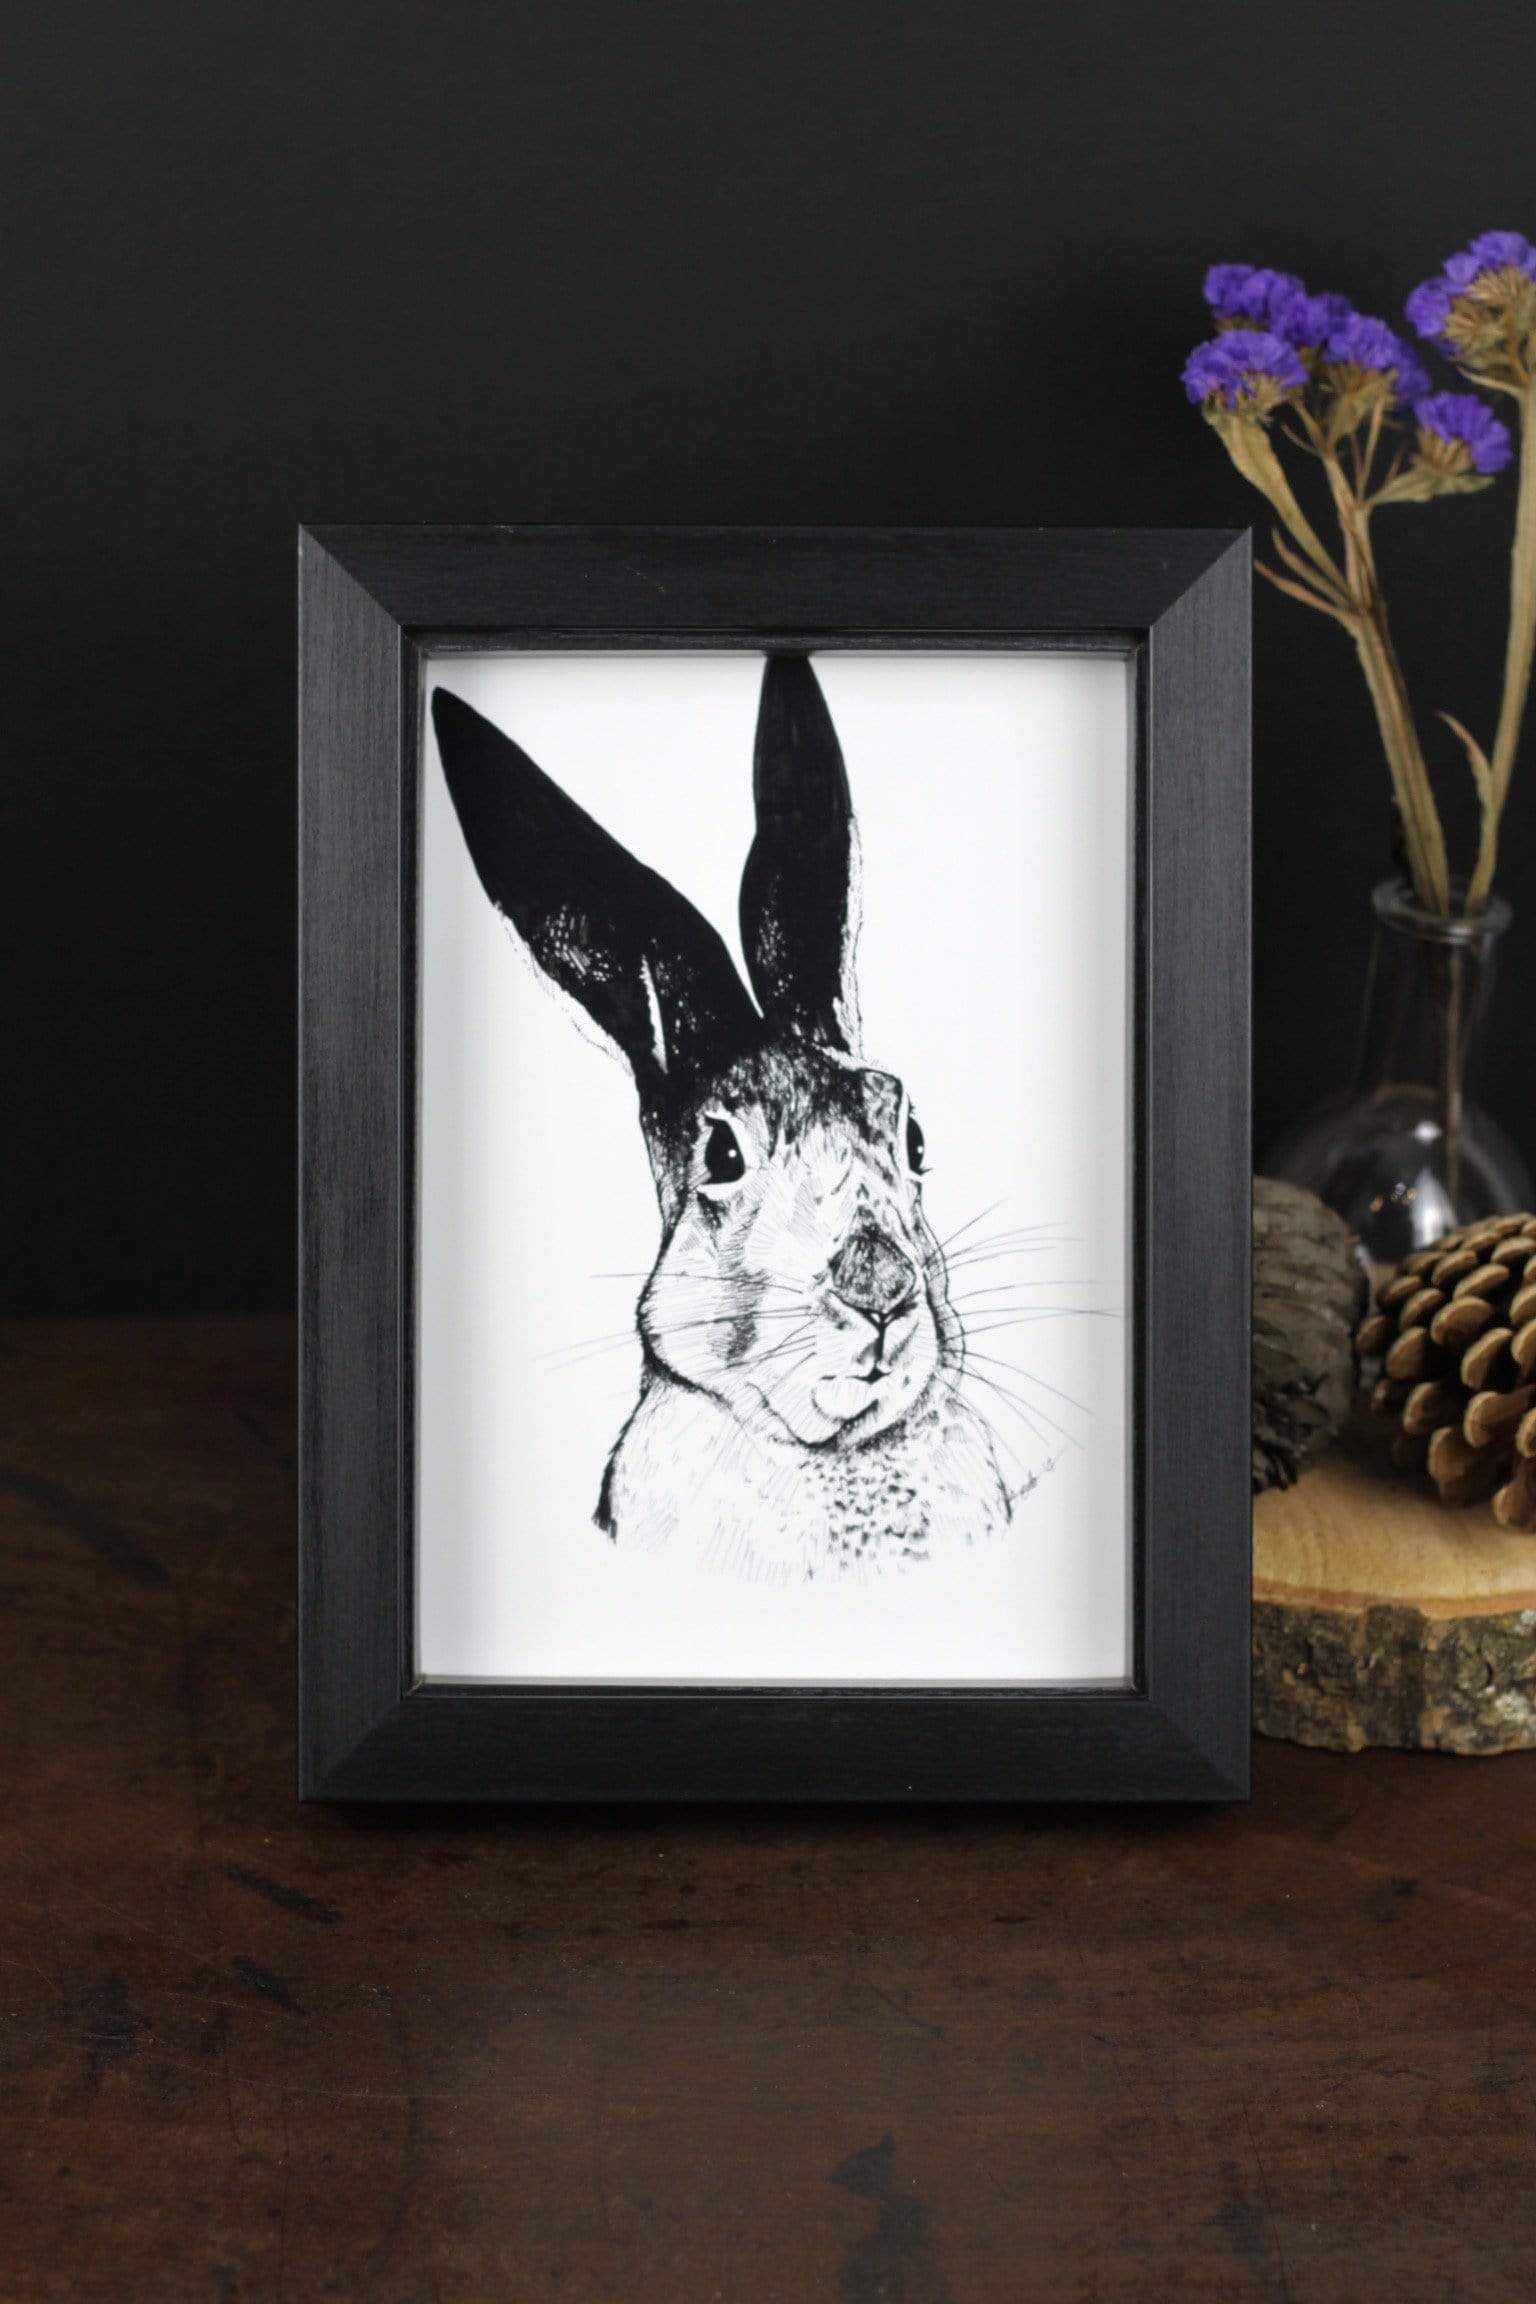 Skeptical Hare A3 Print